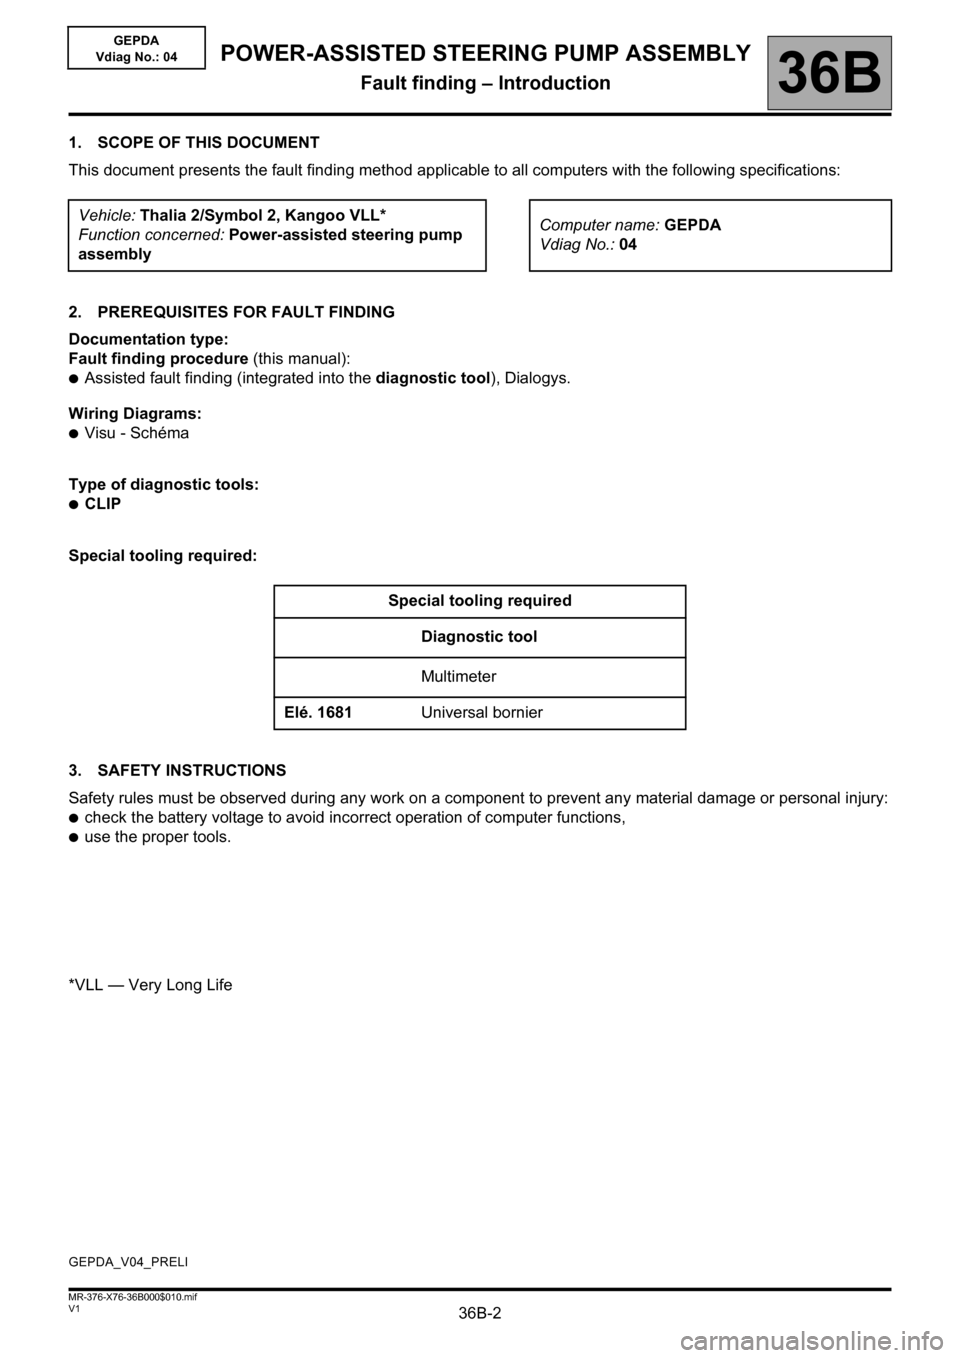 RENAULT KANGOO 2013 X61 / 2.G Power Steering Pump Assembly Workshop Manual 36B-2V1 MR-376-X76-36B000$010.mif
36B
GEPDA
Vdiag No.: 04
1. SCOPE OF THIS DOCUMENT
This document presents the fault finding method applicable to all computers with the following specifications:
2. PR